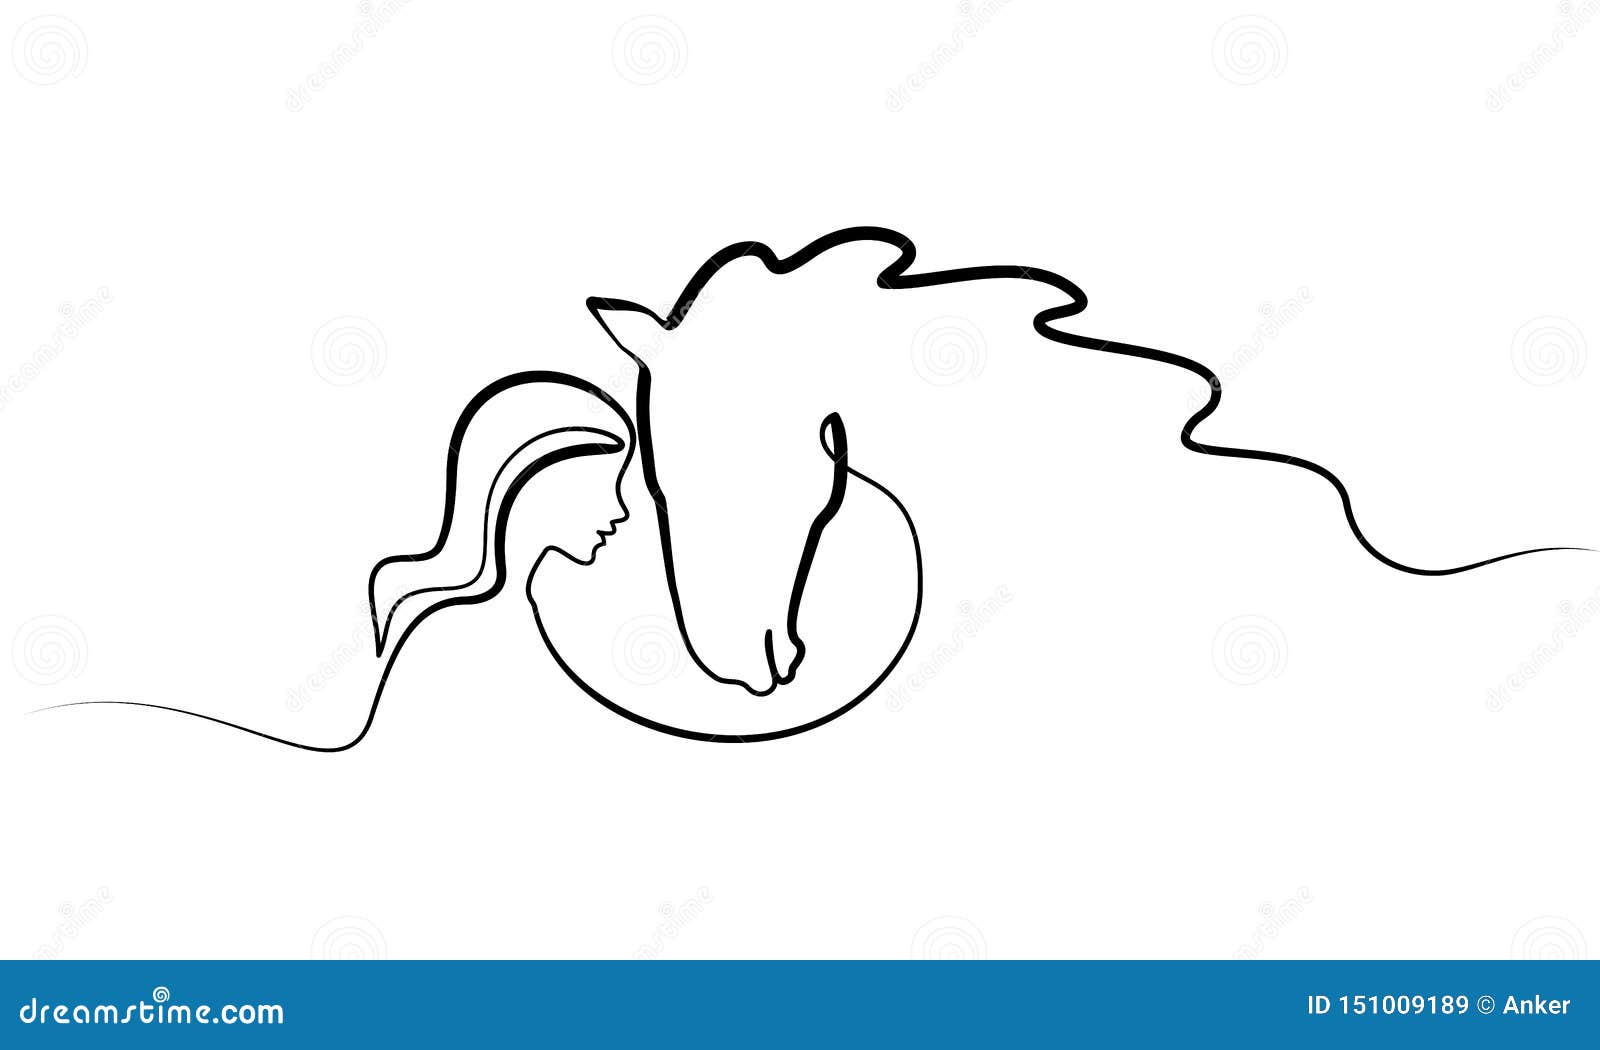 one line drawing. horse and woman heads logo